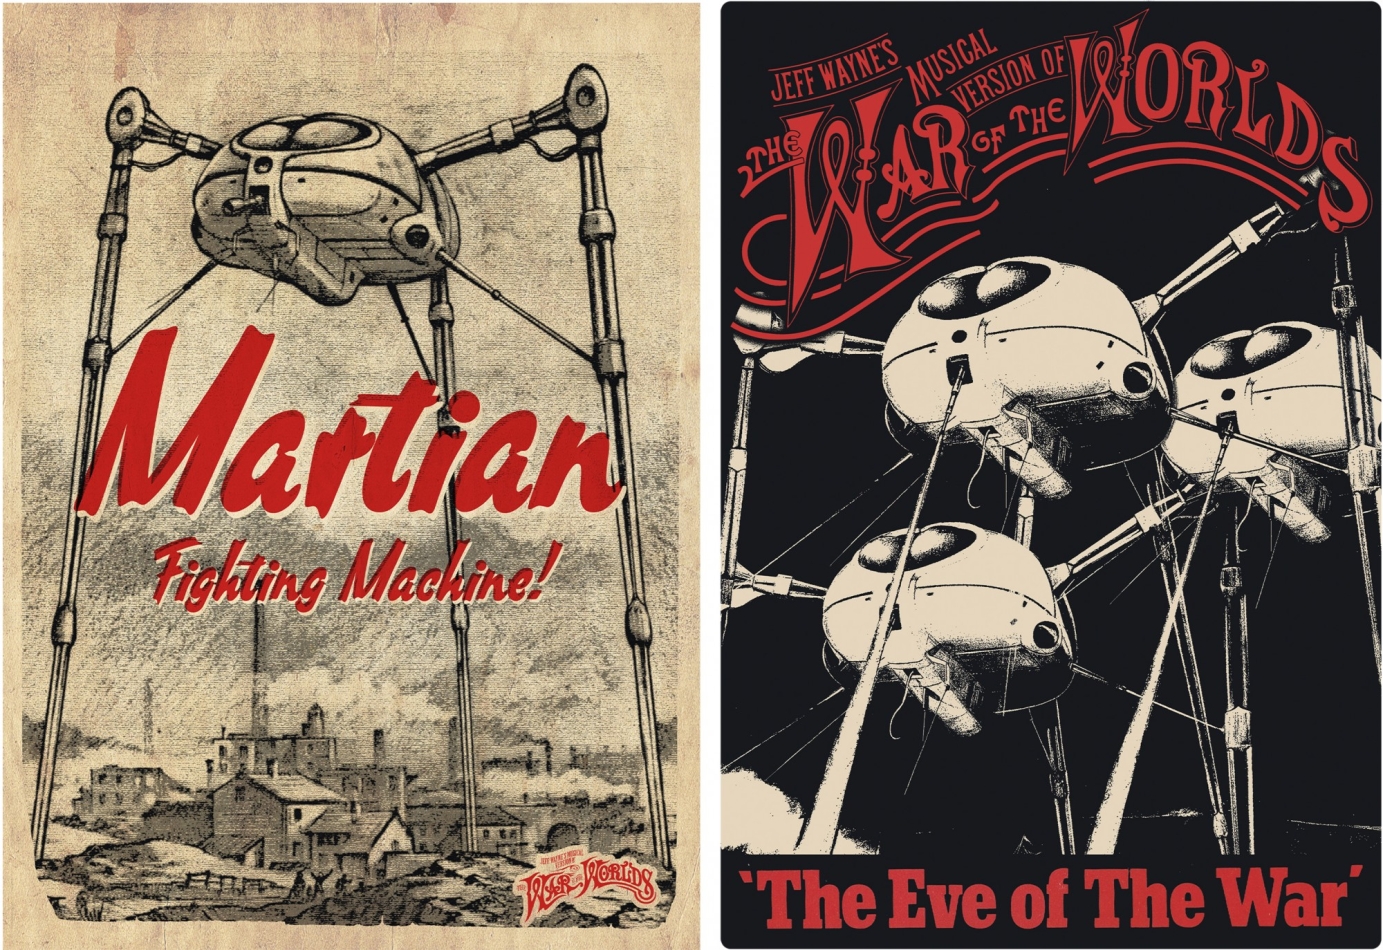 Merchandise for Jeff Wayne's Musical Version of The War of The Worlds by inckt